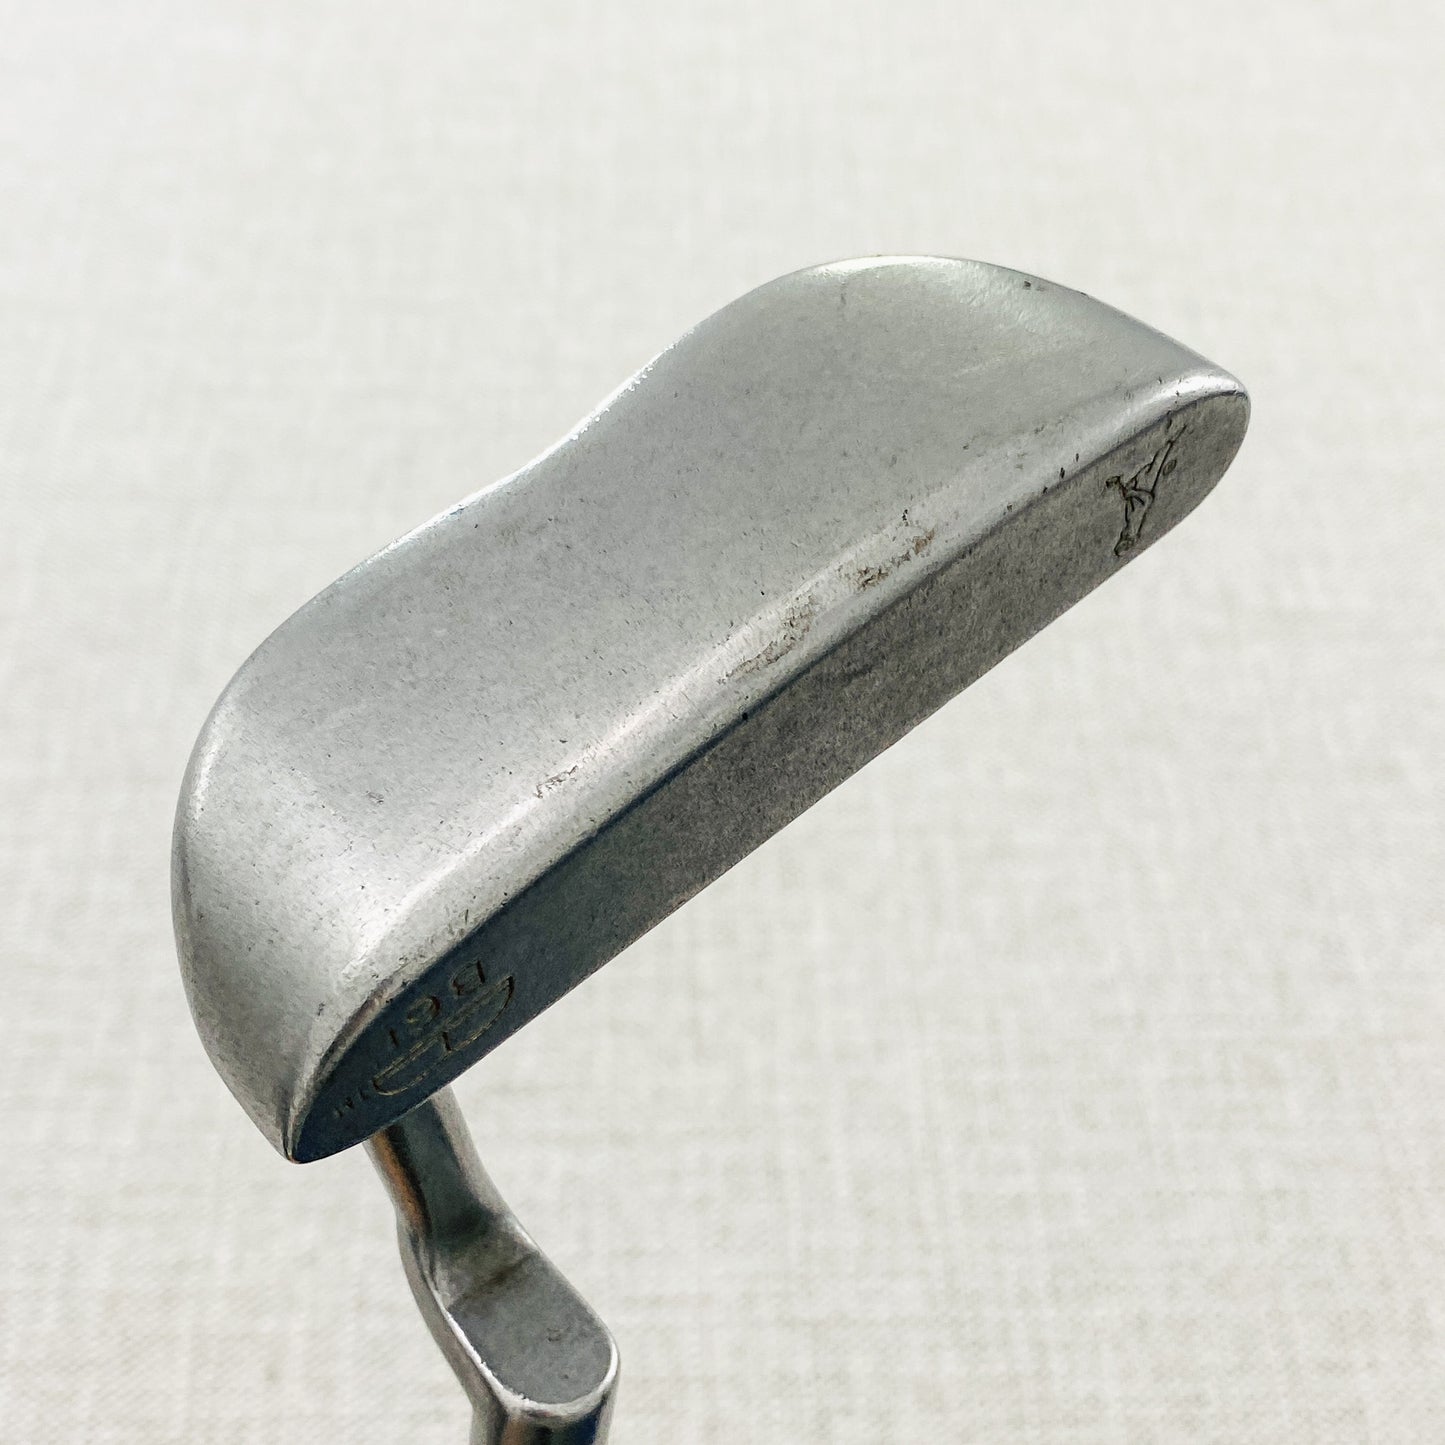 PING B61 Stainless Putter. 34.5 inch - Very Good Condition # T676